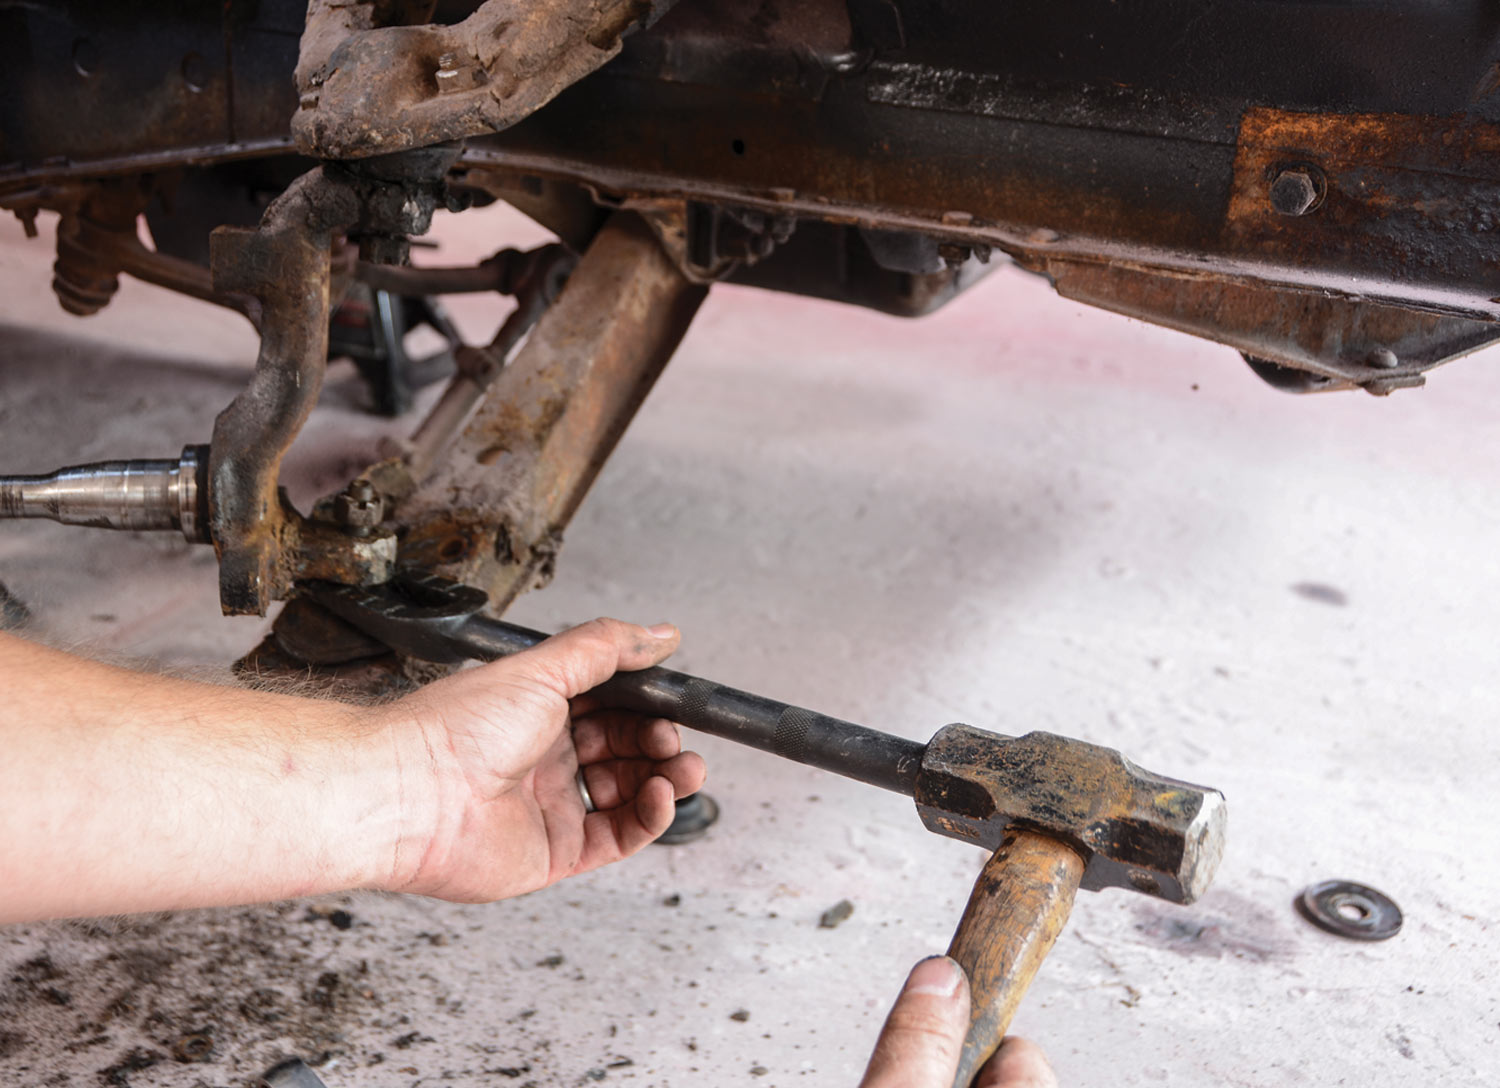 a mini sledgehammer is used to break the ball joint loose from the spindle